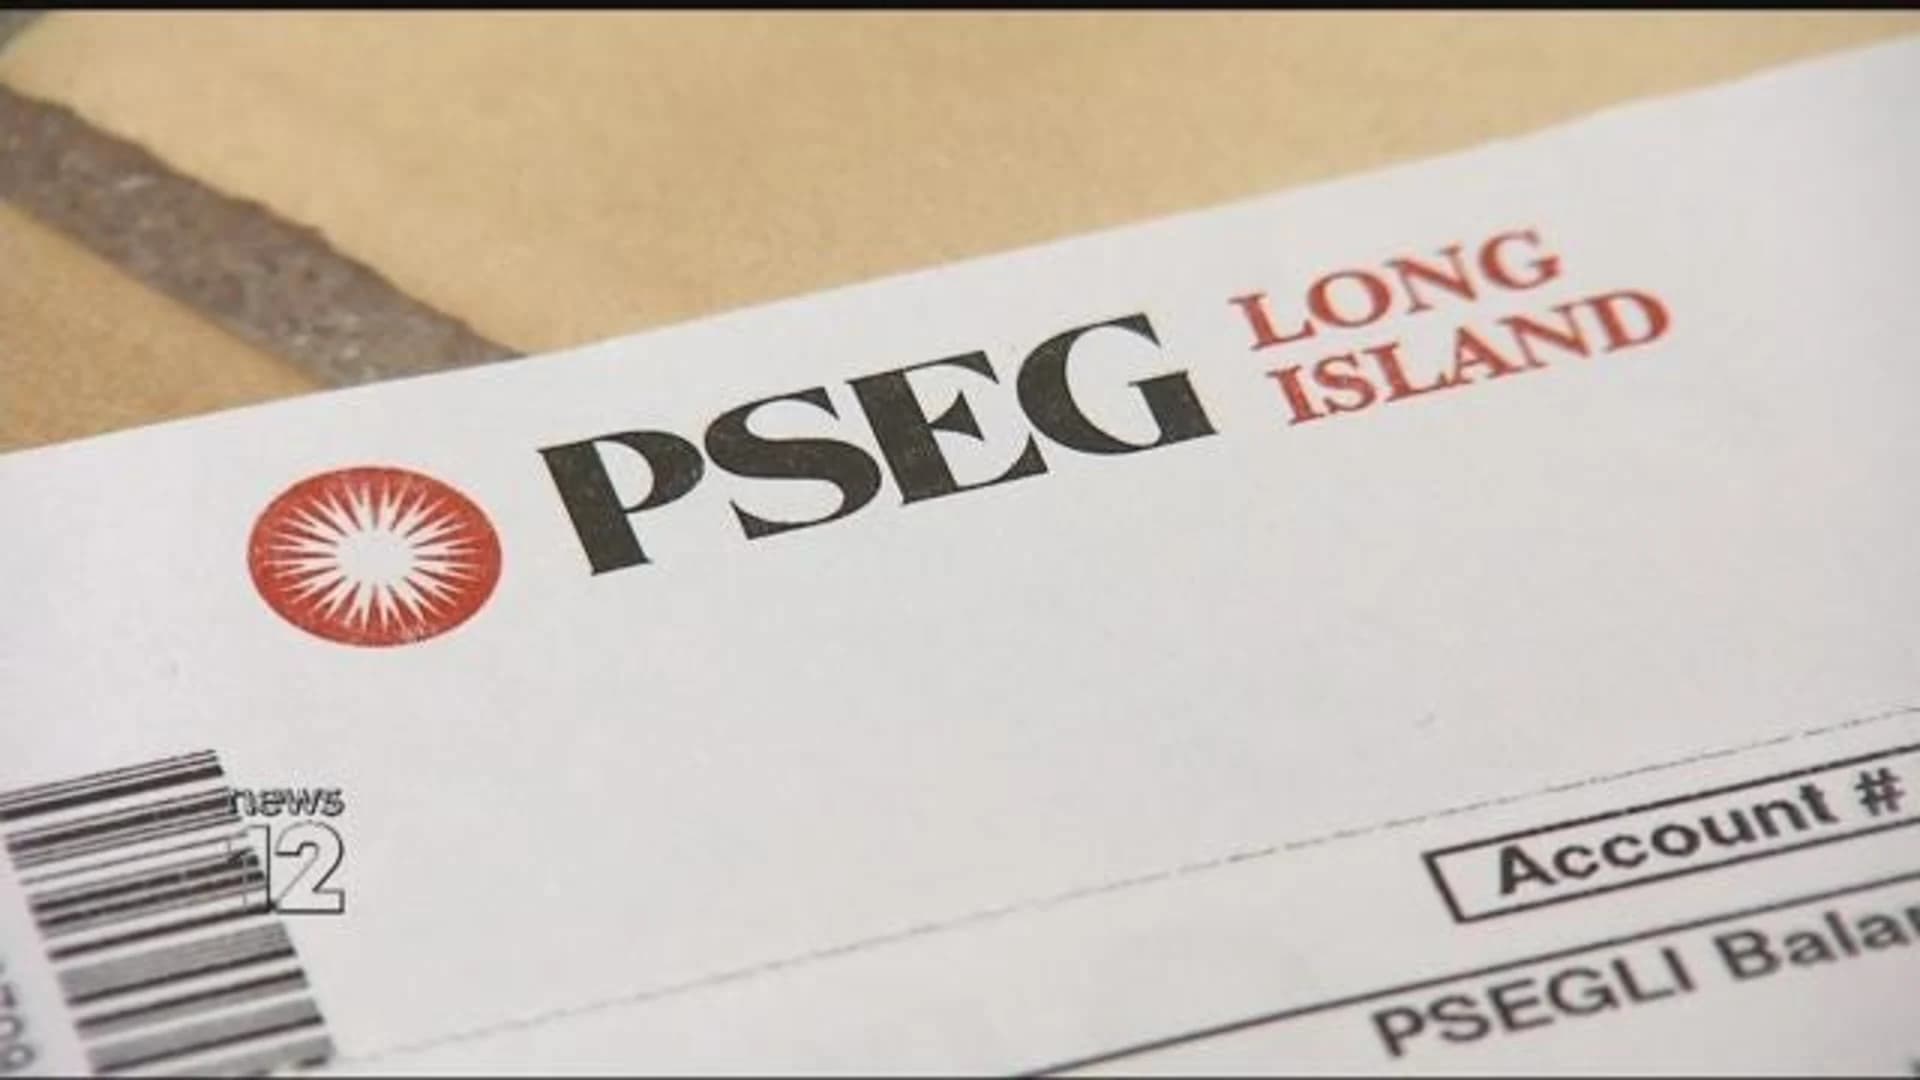 PSEG Long Island offering grants to help small businesses impacted by pandemic